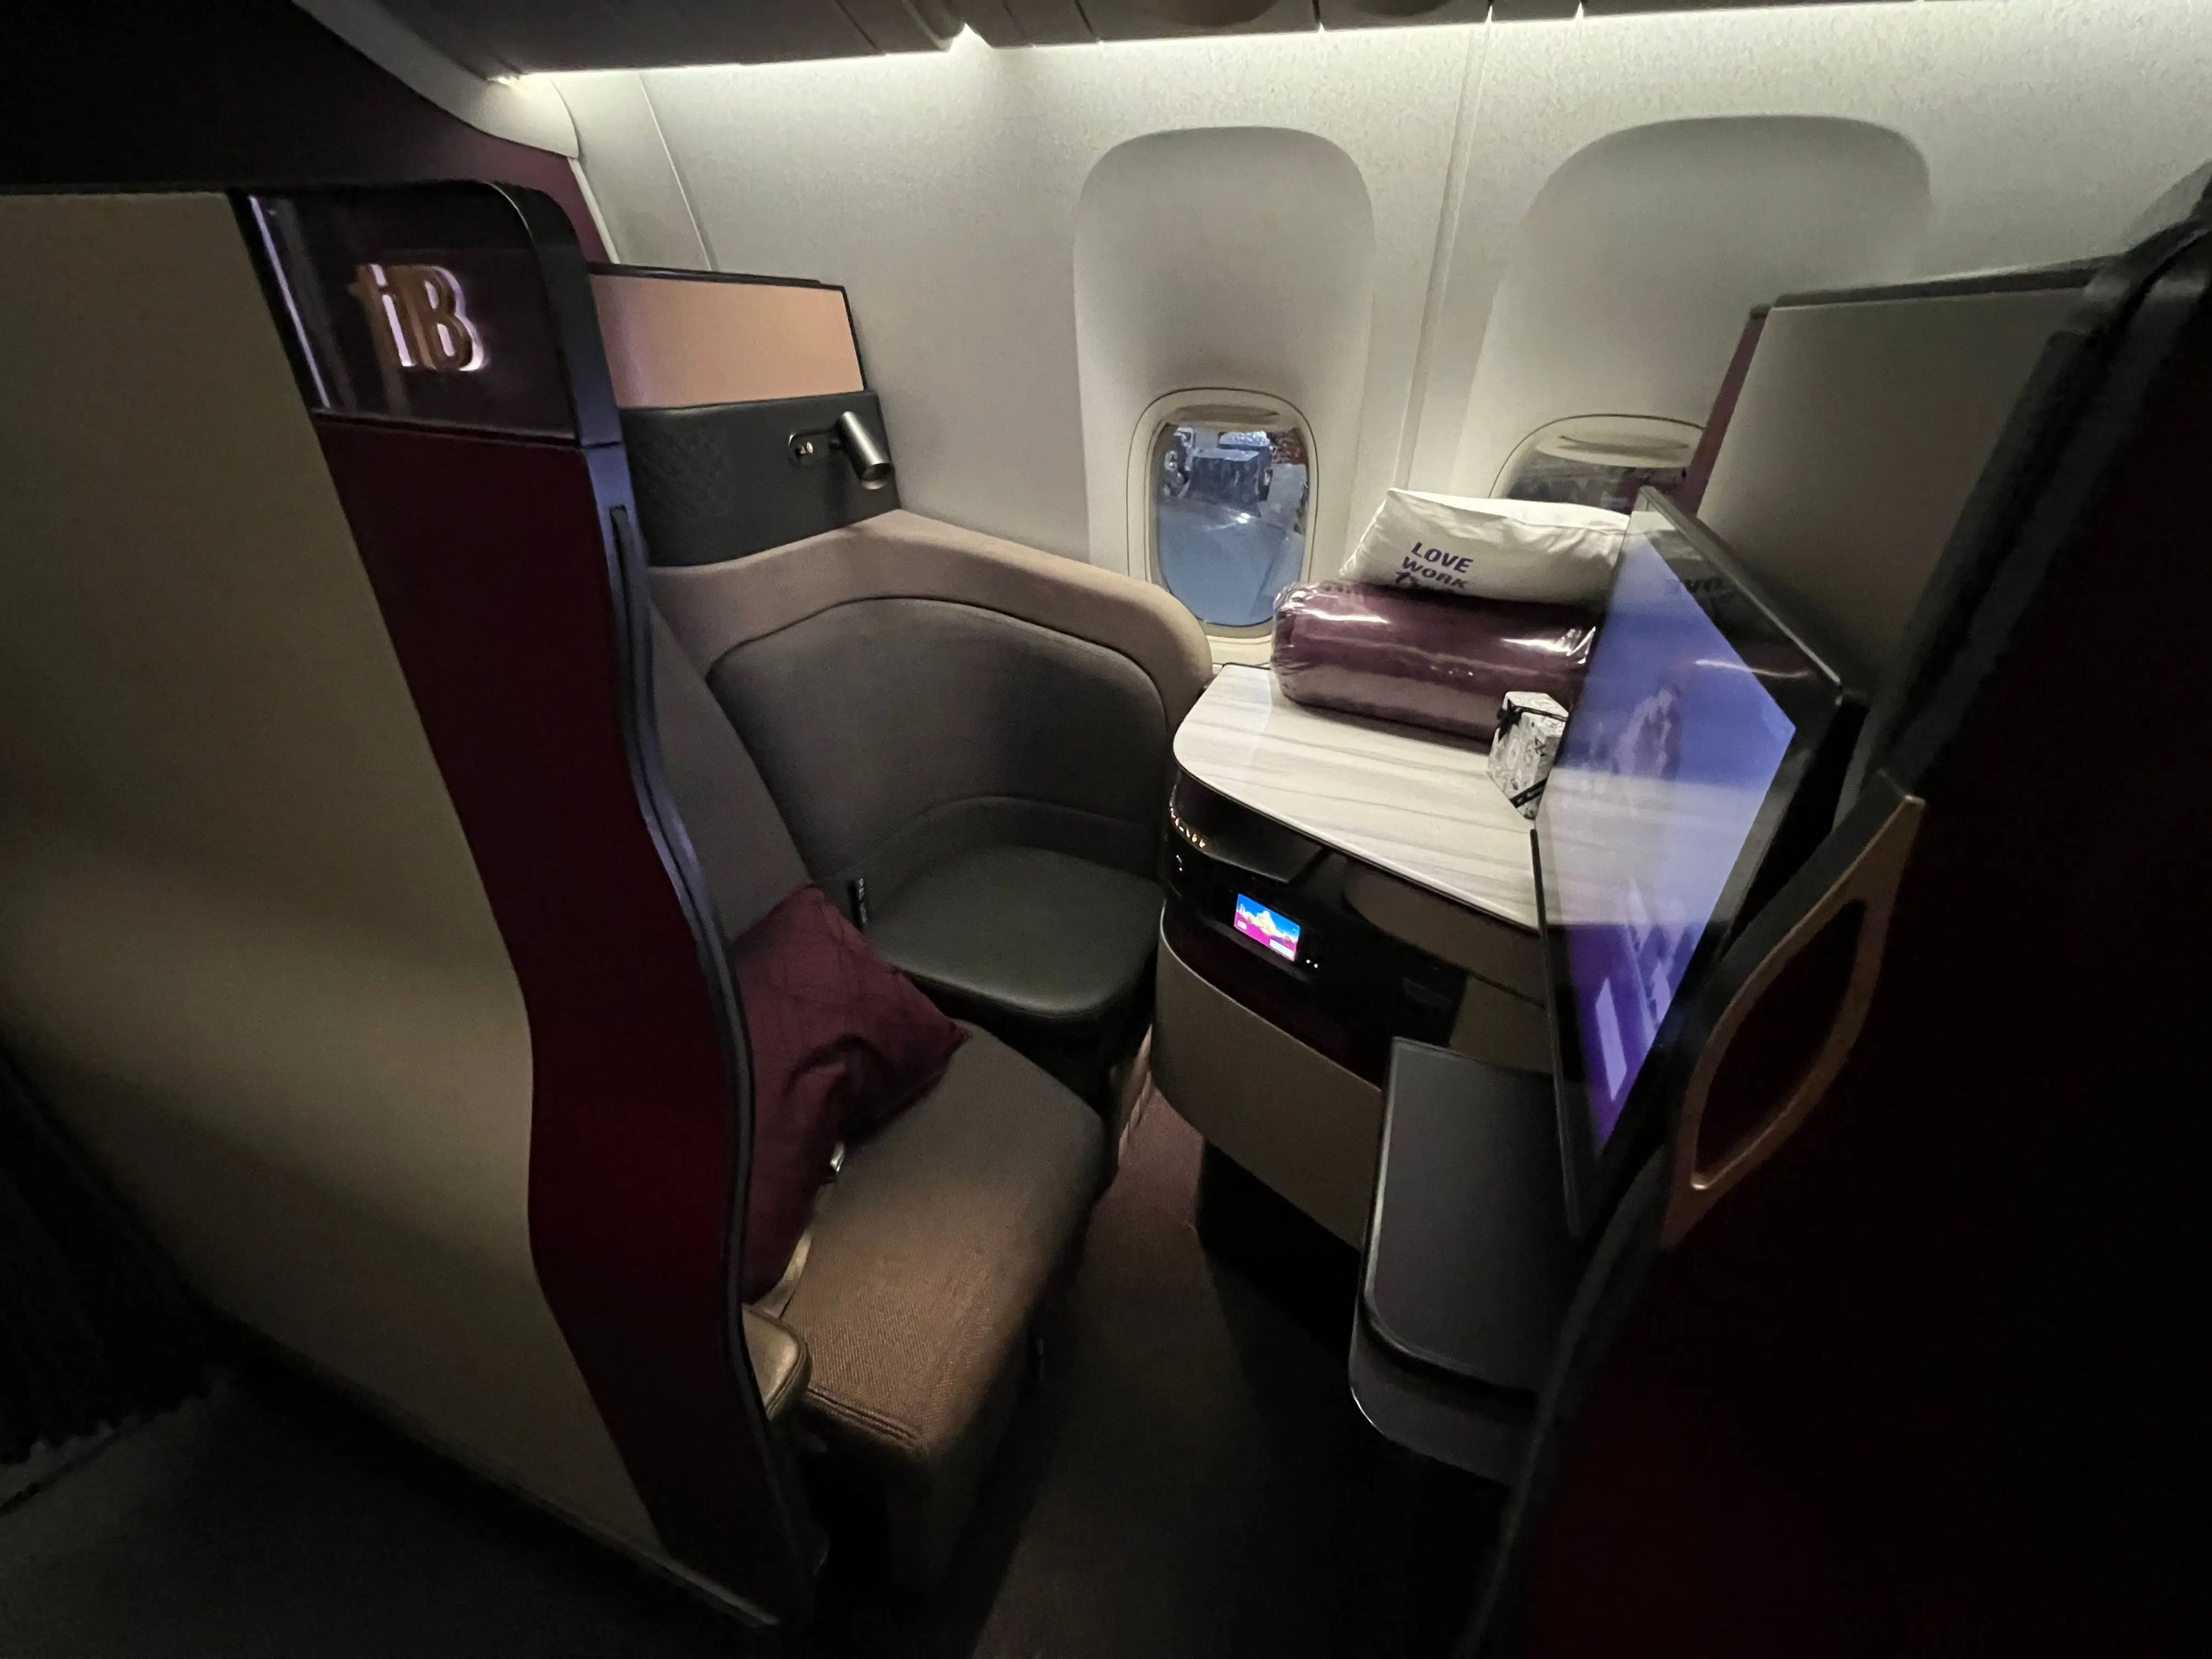 The Qsuites seat on the plane.